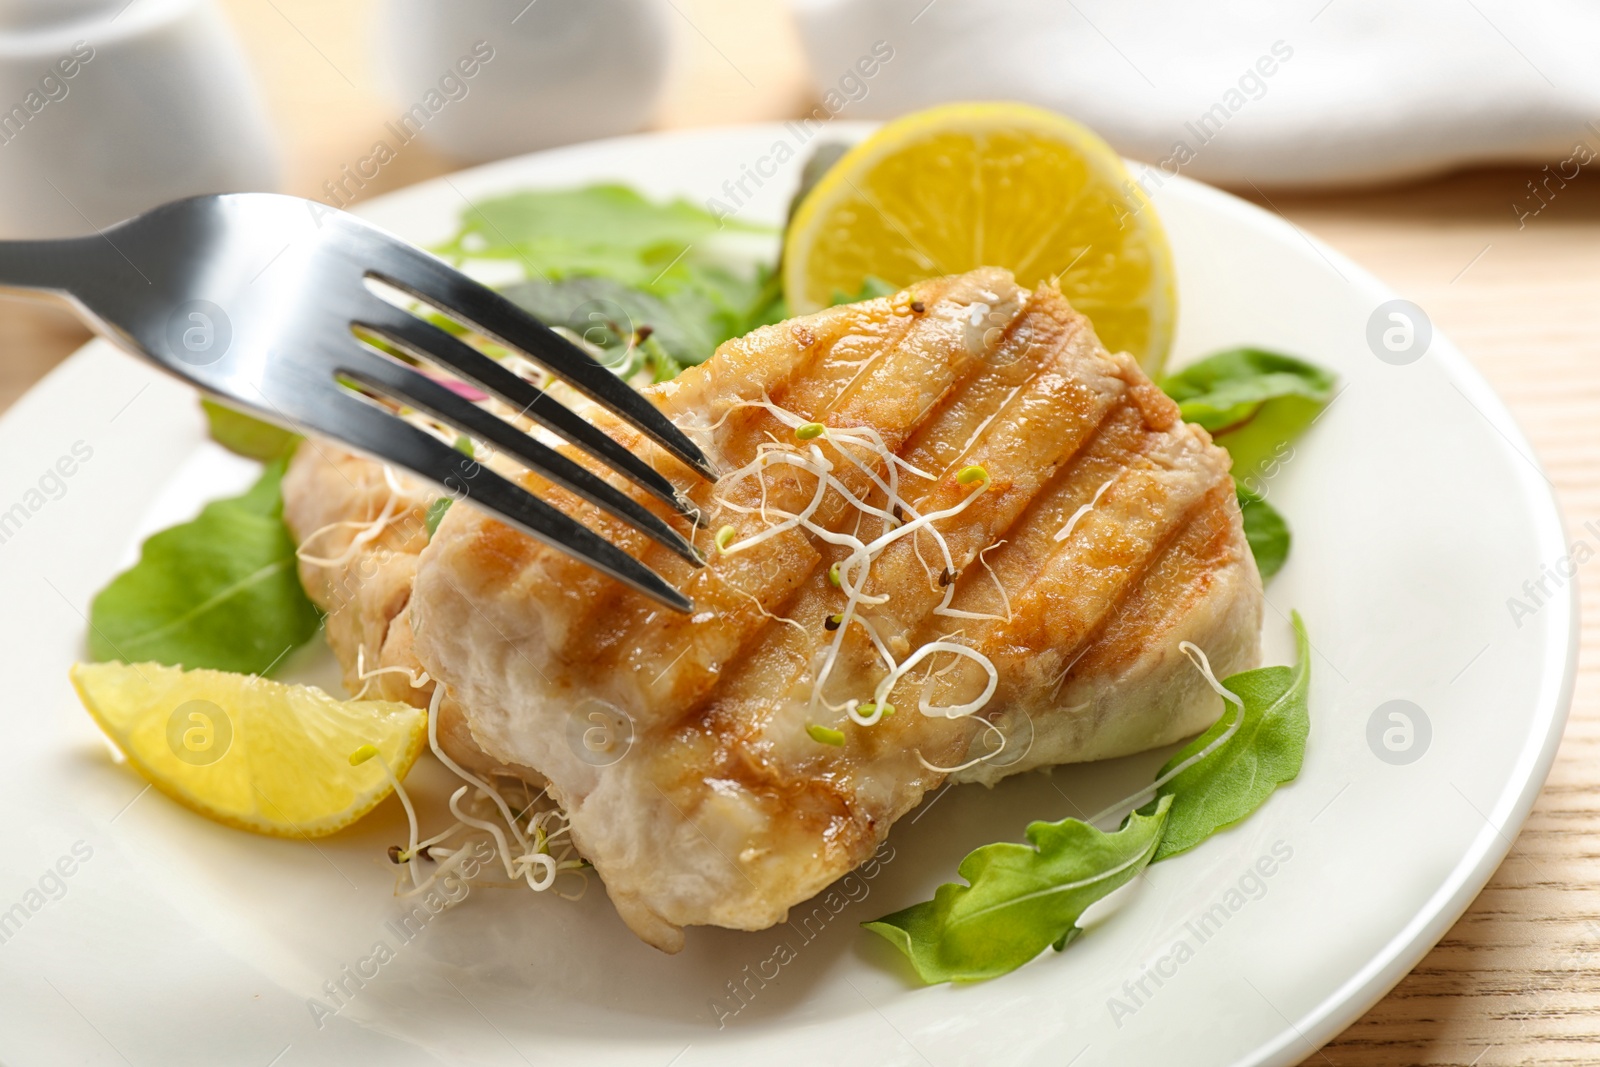 Photo of Tasty grilled fish served on wooden table, closeup